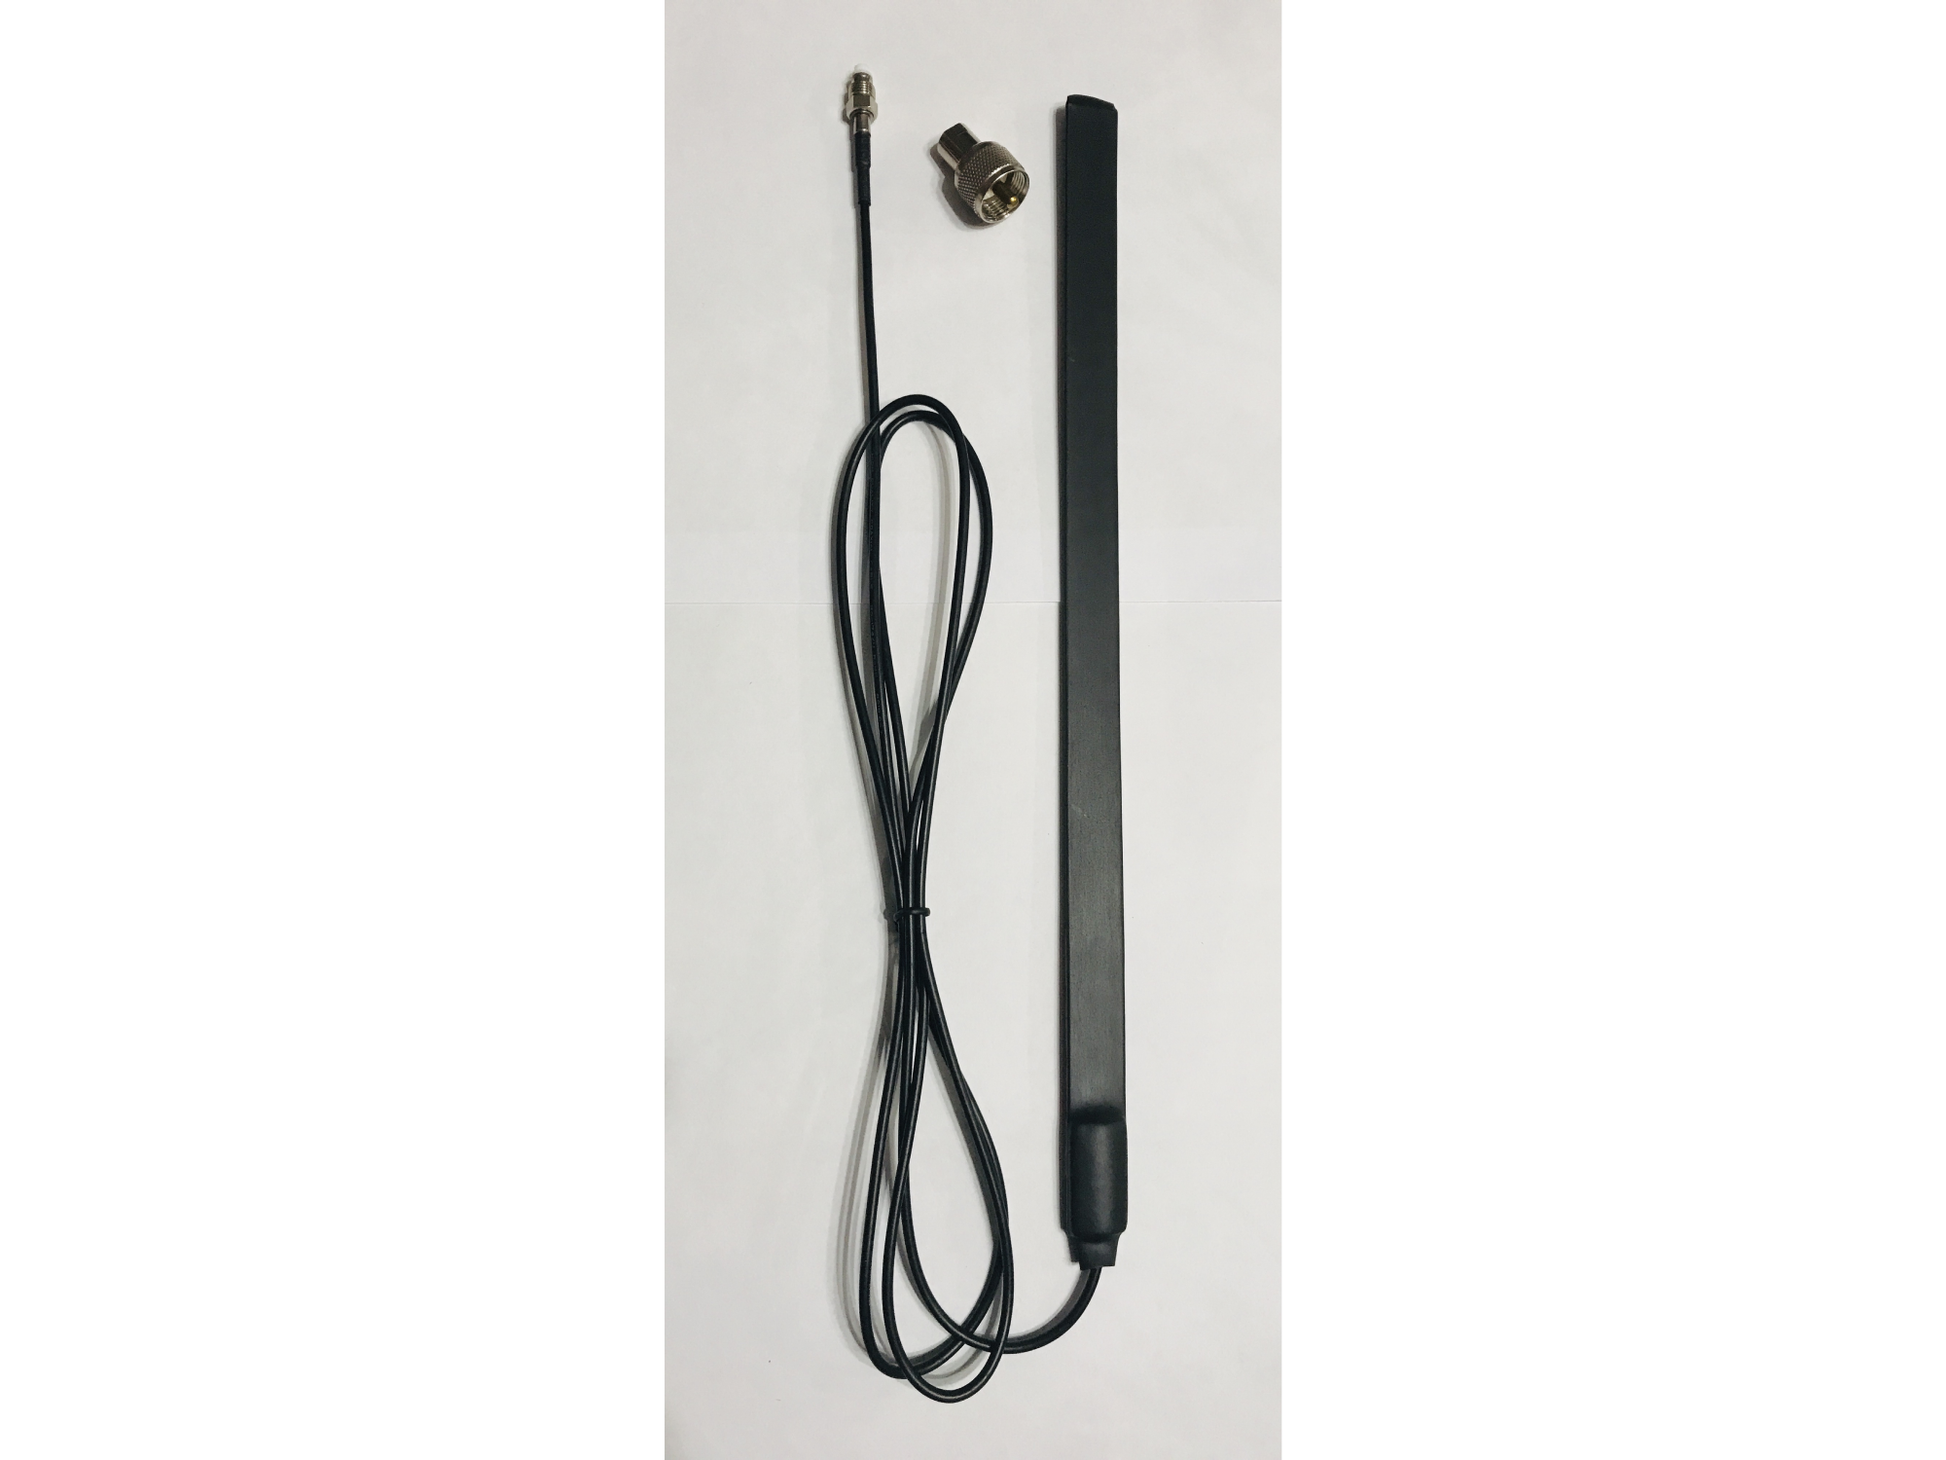 On Glass UHF CB Internal Antenna with NO extension - G&C Communications